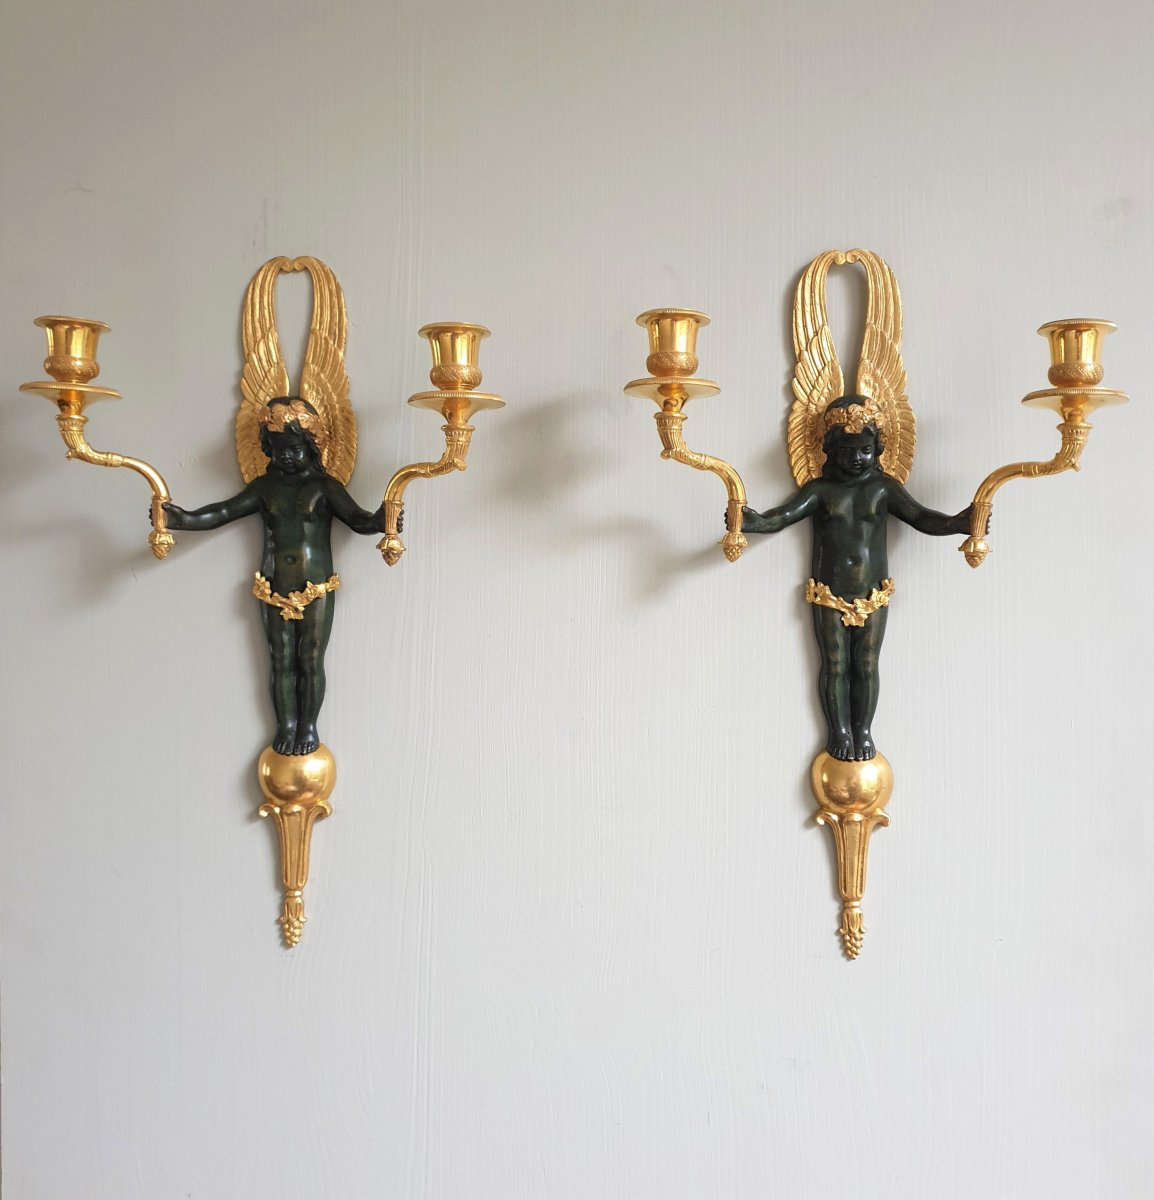 Pair of Restauration period gilt-bronze and patinated bronze sconces